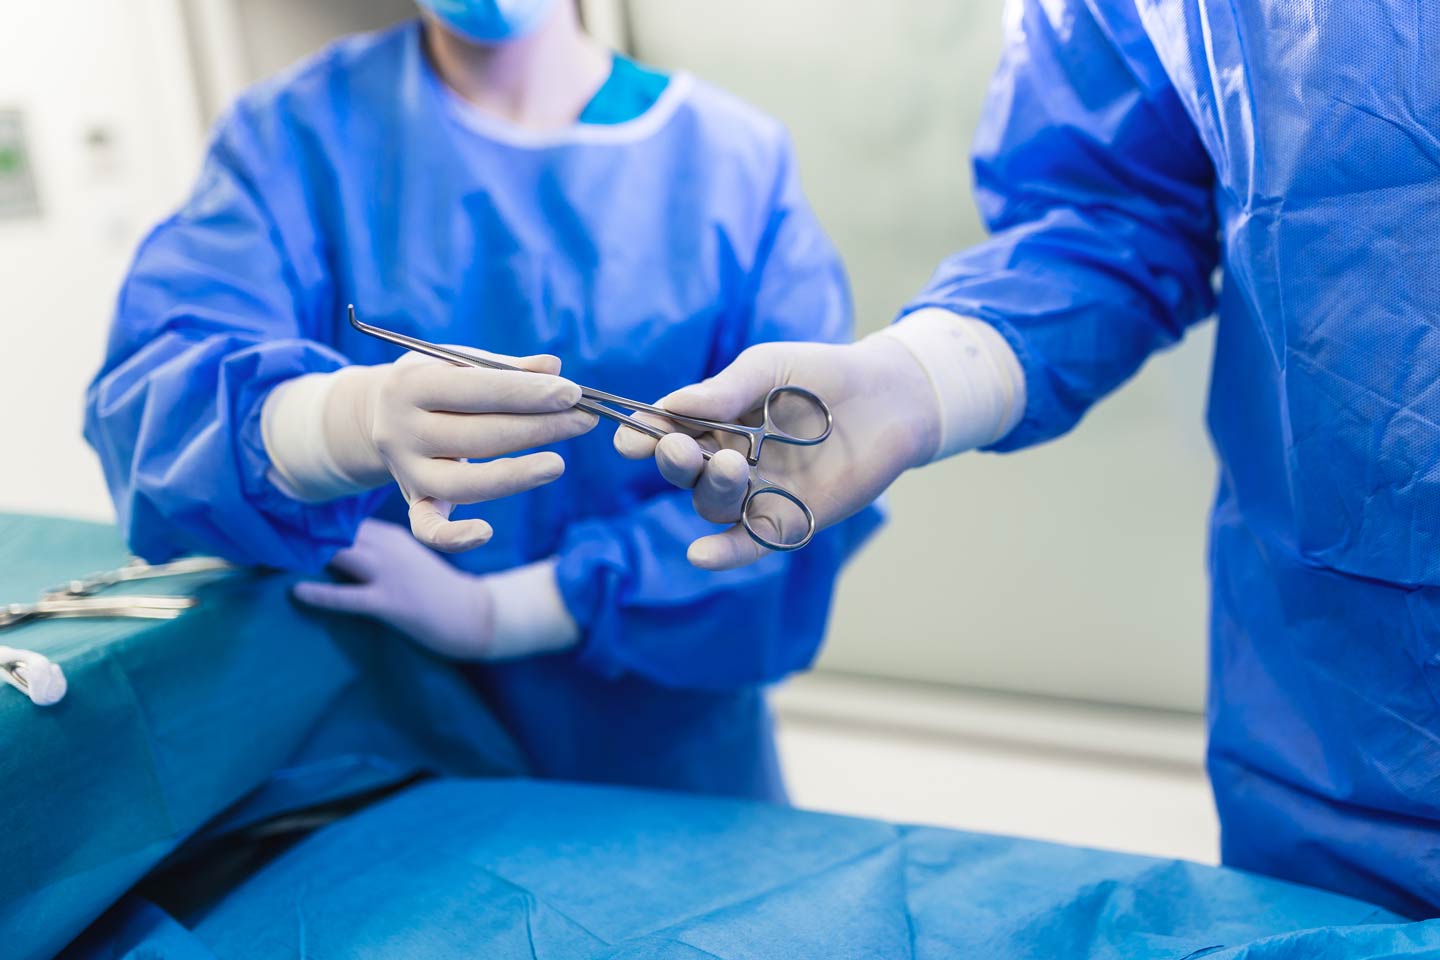 Sterile Processing: Helping Improve the Life of an Operating Room Nurse